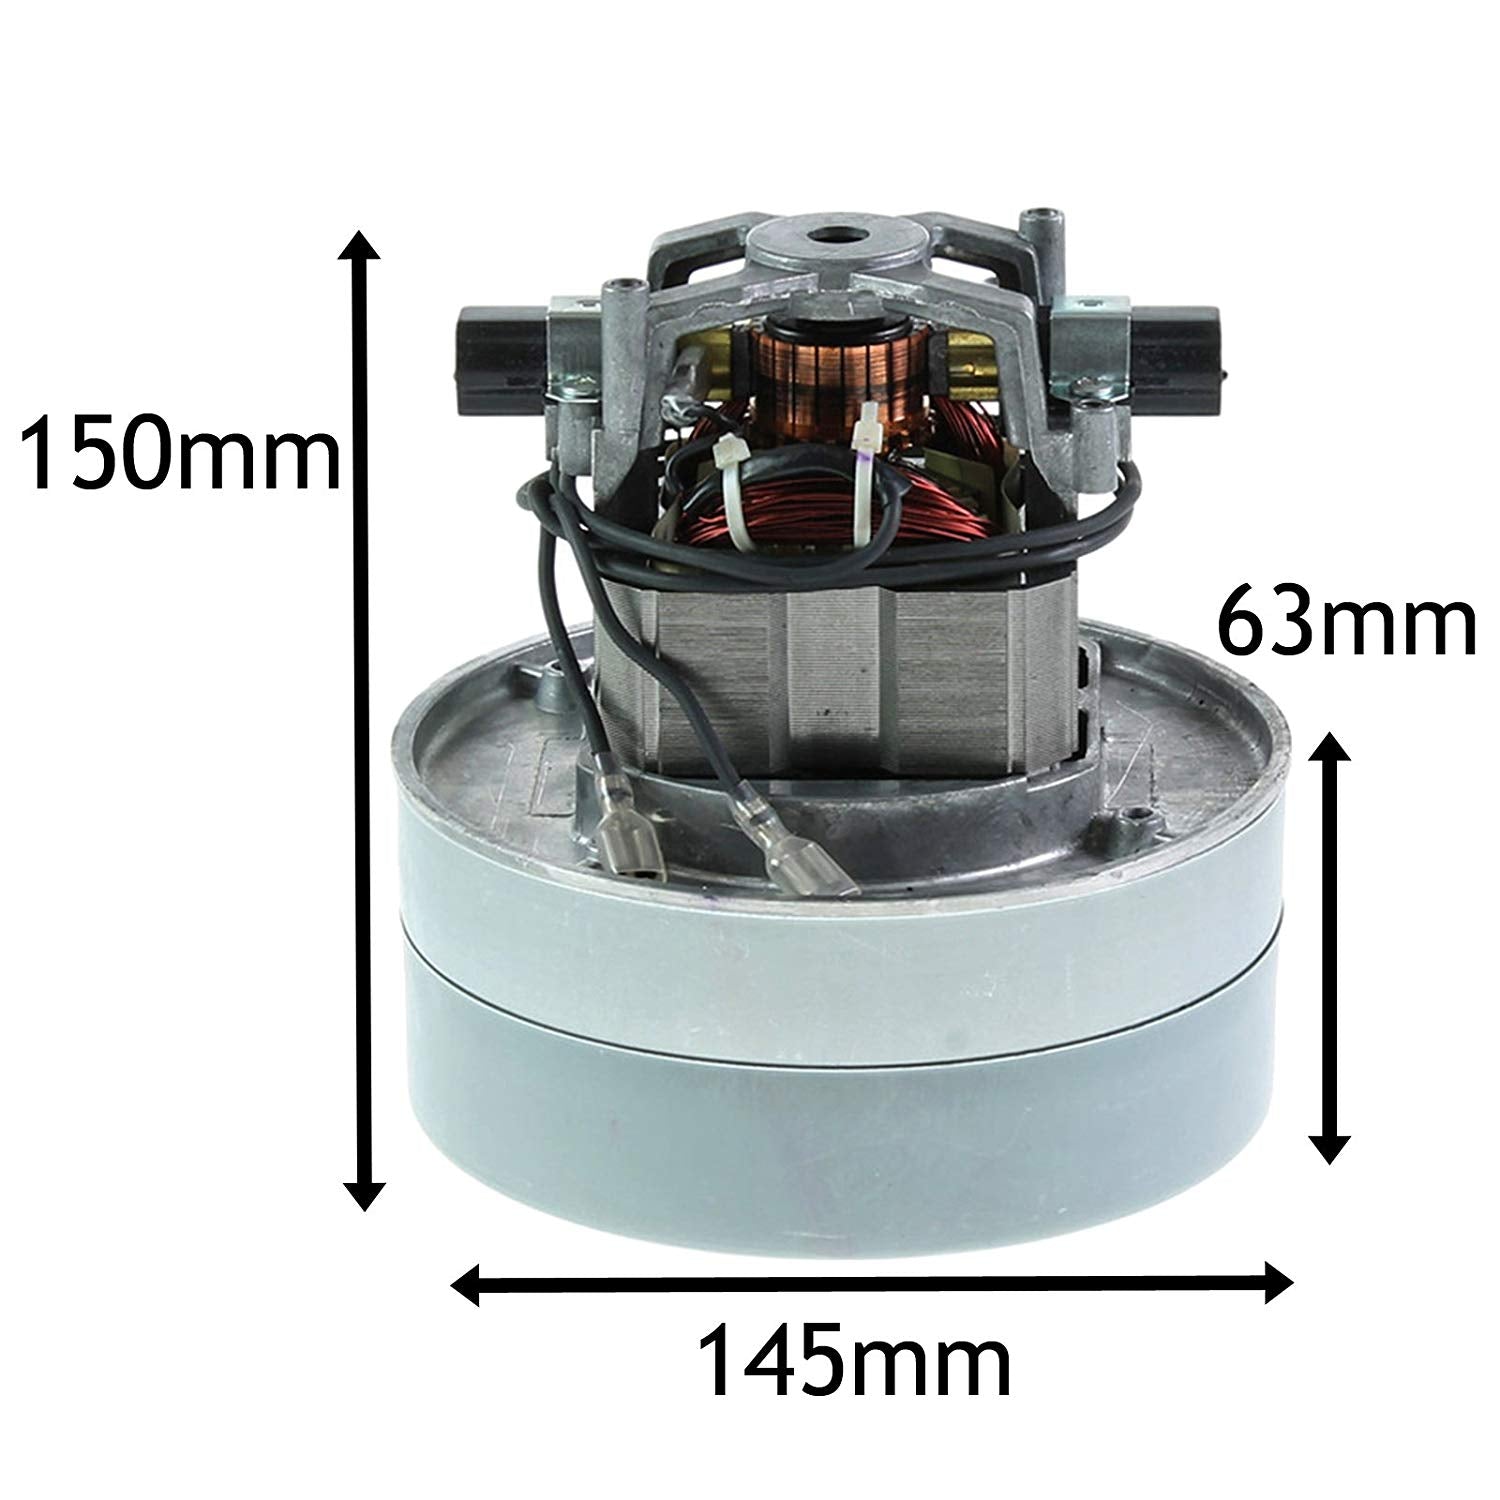 Complete Motor Unit for NUMATIC Henry Hetty Vacuum Cleaner (TCO DL2 1104T 205403 240V)